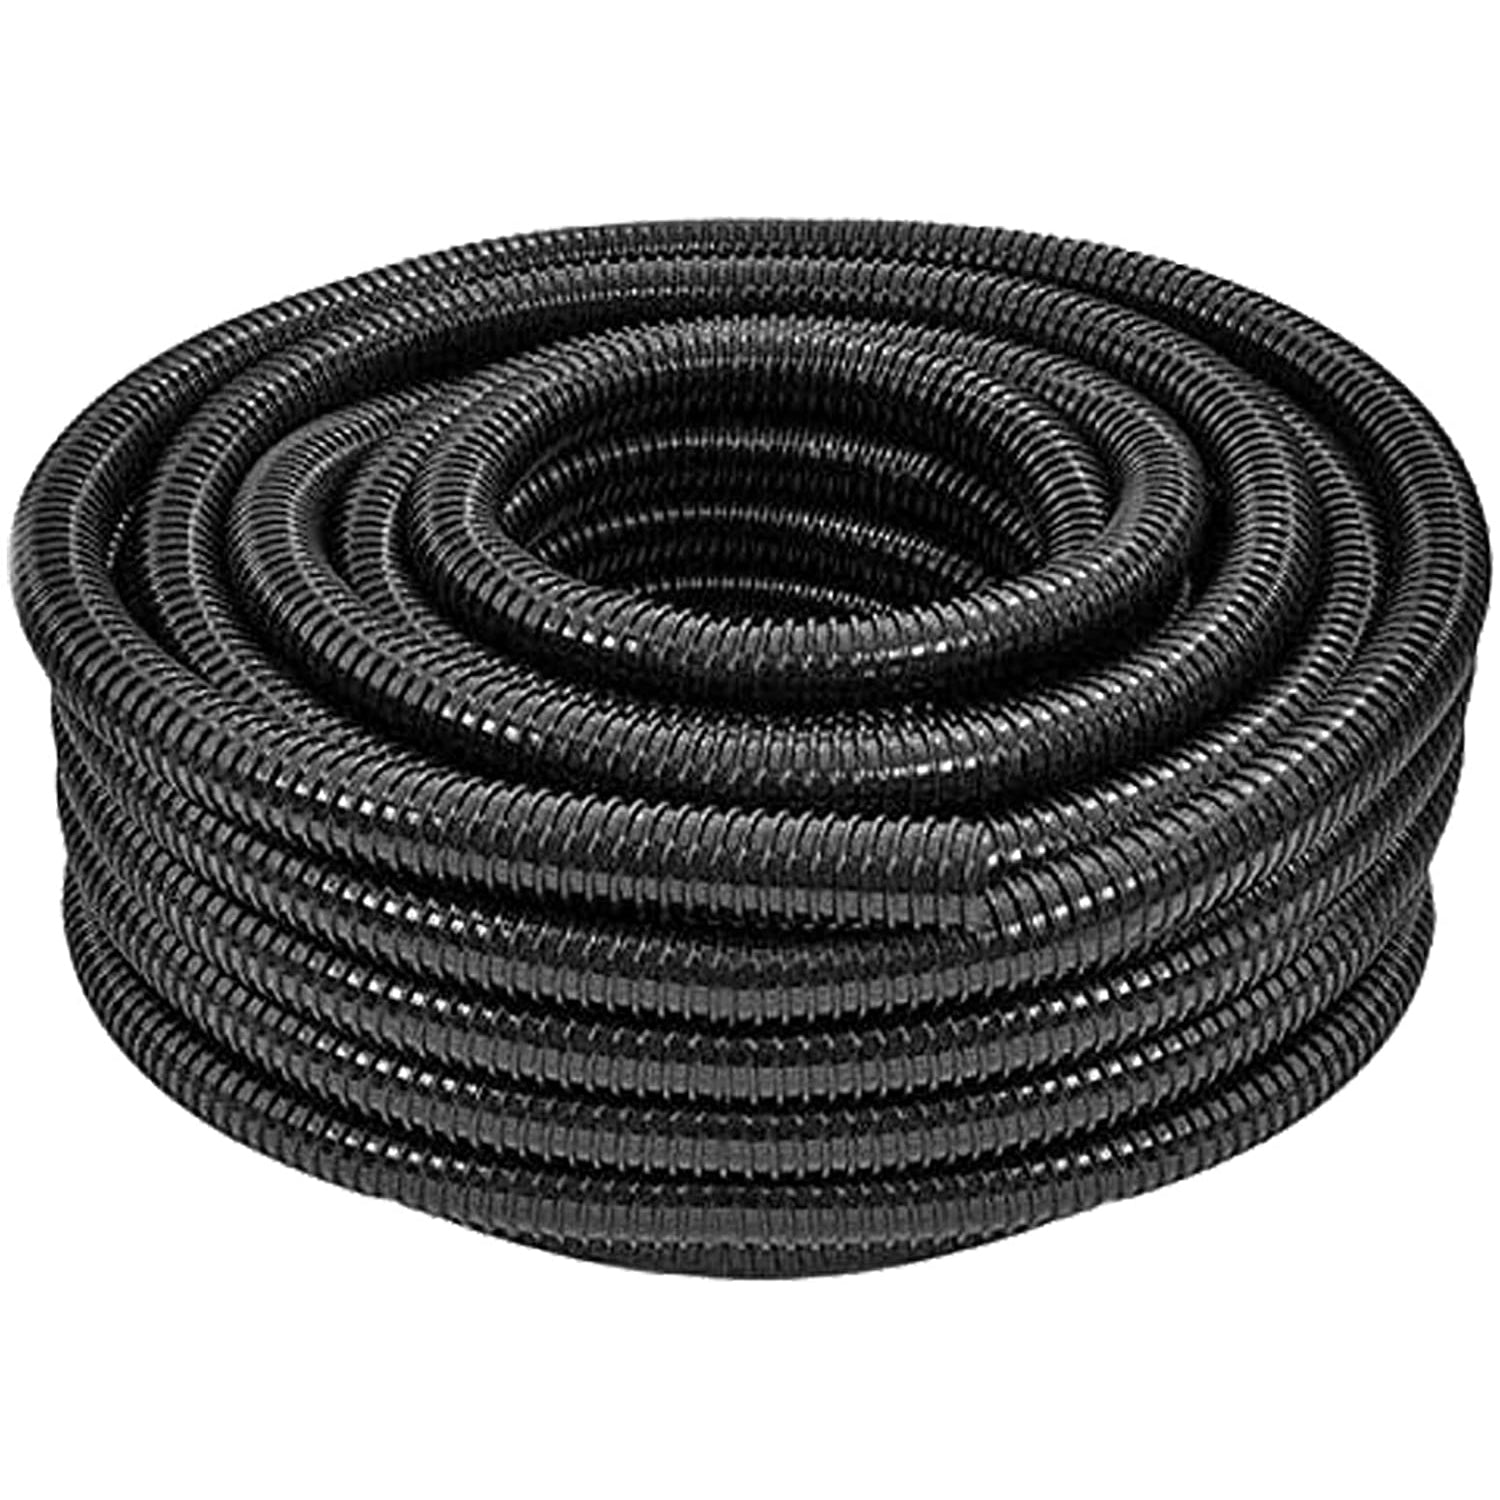 Universal Flexible Corrugated Hose Pipe Tube for Water, Air & Dust (25mm, 5m)